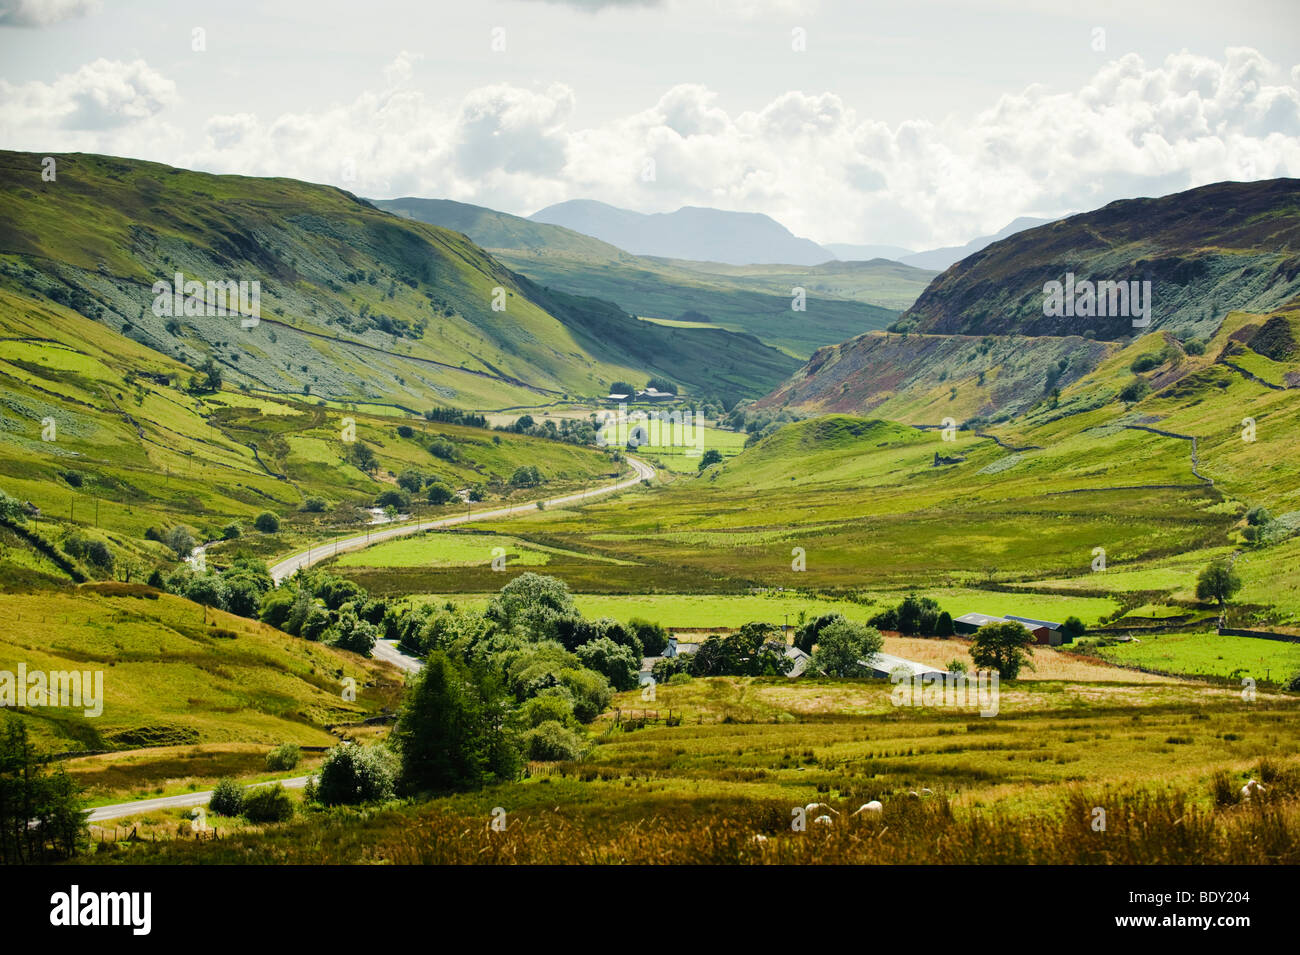 View looking down Cwm Prysor valley, snowdonia national park, gwynedd north wales, UK, summer afternoon Stock Photo